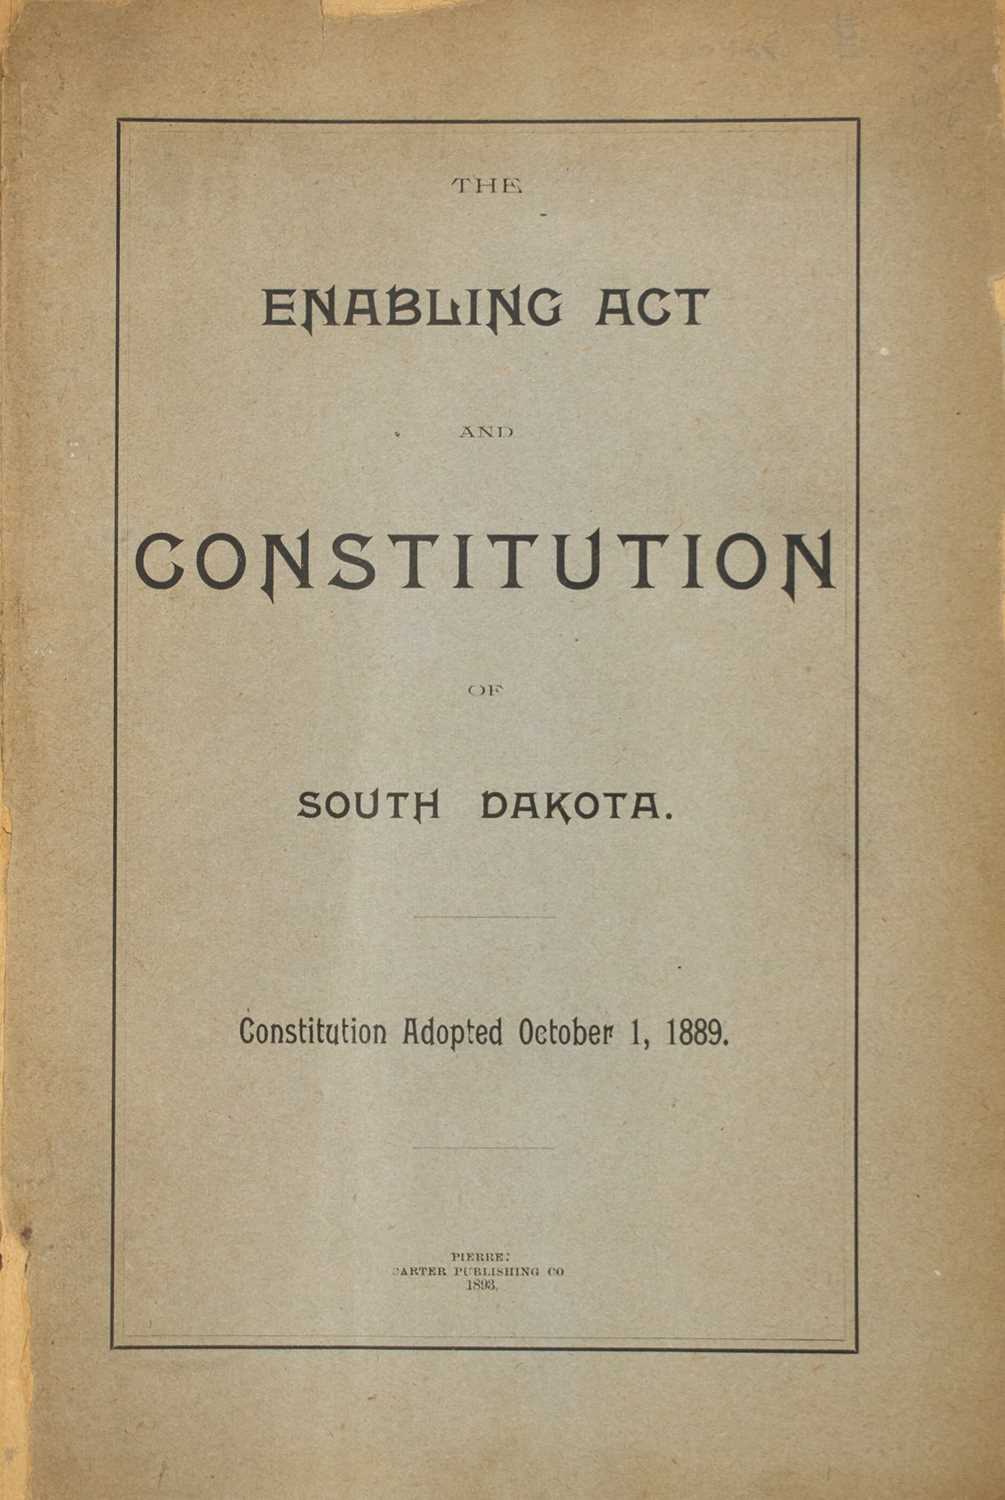 Lot 21 - An early printing of the South Dakota Constitution